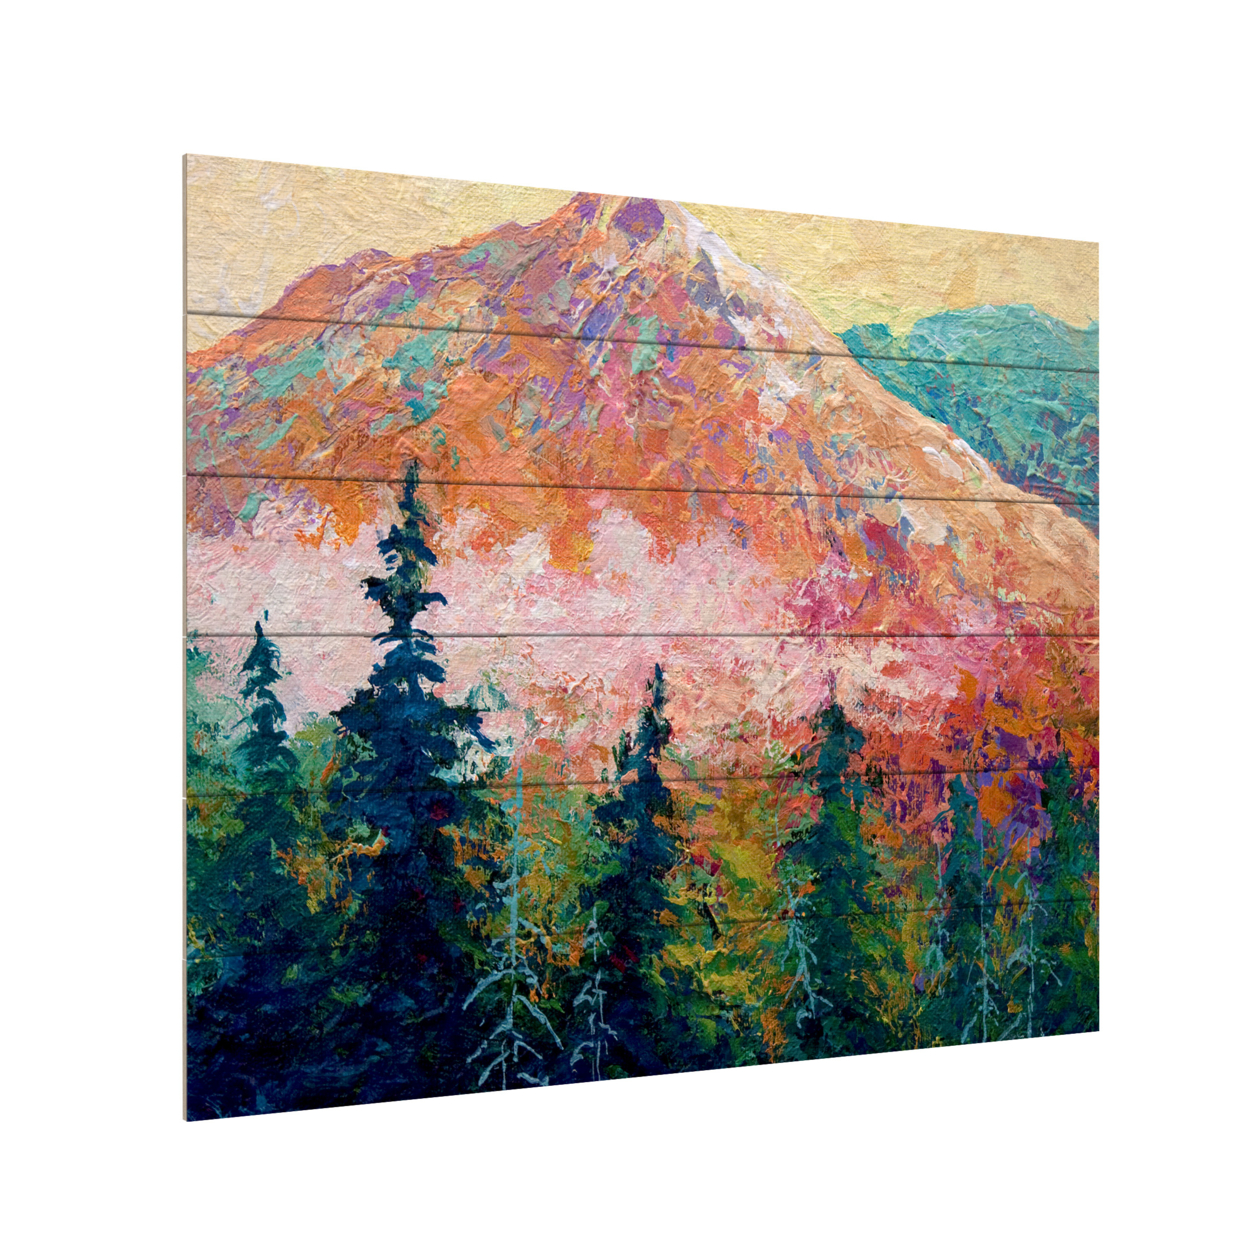 Wooden Slat Art 18 X 22 Inches Titled Mtn Sentinel Ready To Hang Home Decor Picture